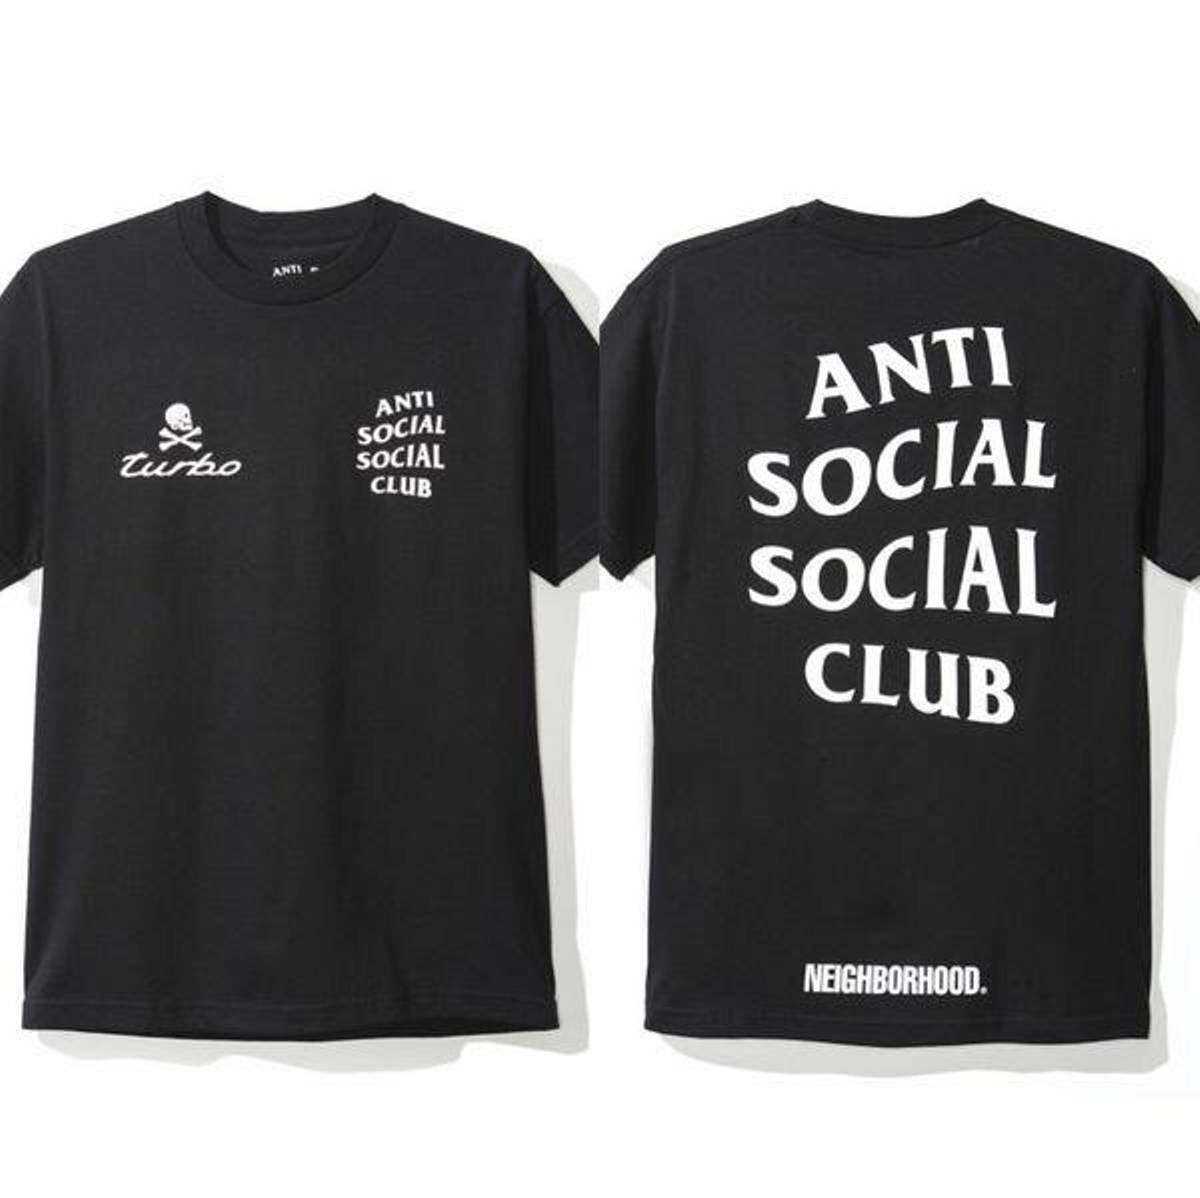 Anti Social Social Club X Neighborhood 911 Turbo Tee ( Black Colour ) - Shop Streetwear, Sneakers, Slippers and Gifts online | Malaysia - The Factory KL